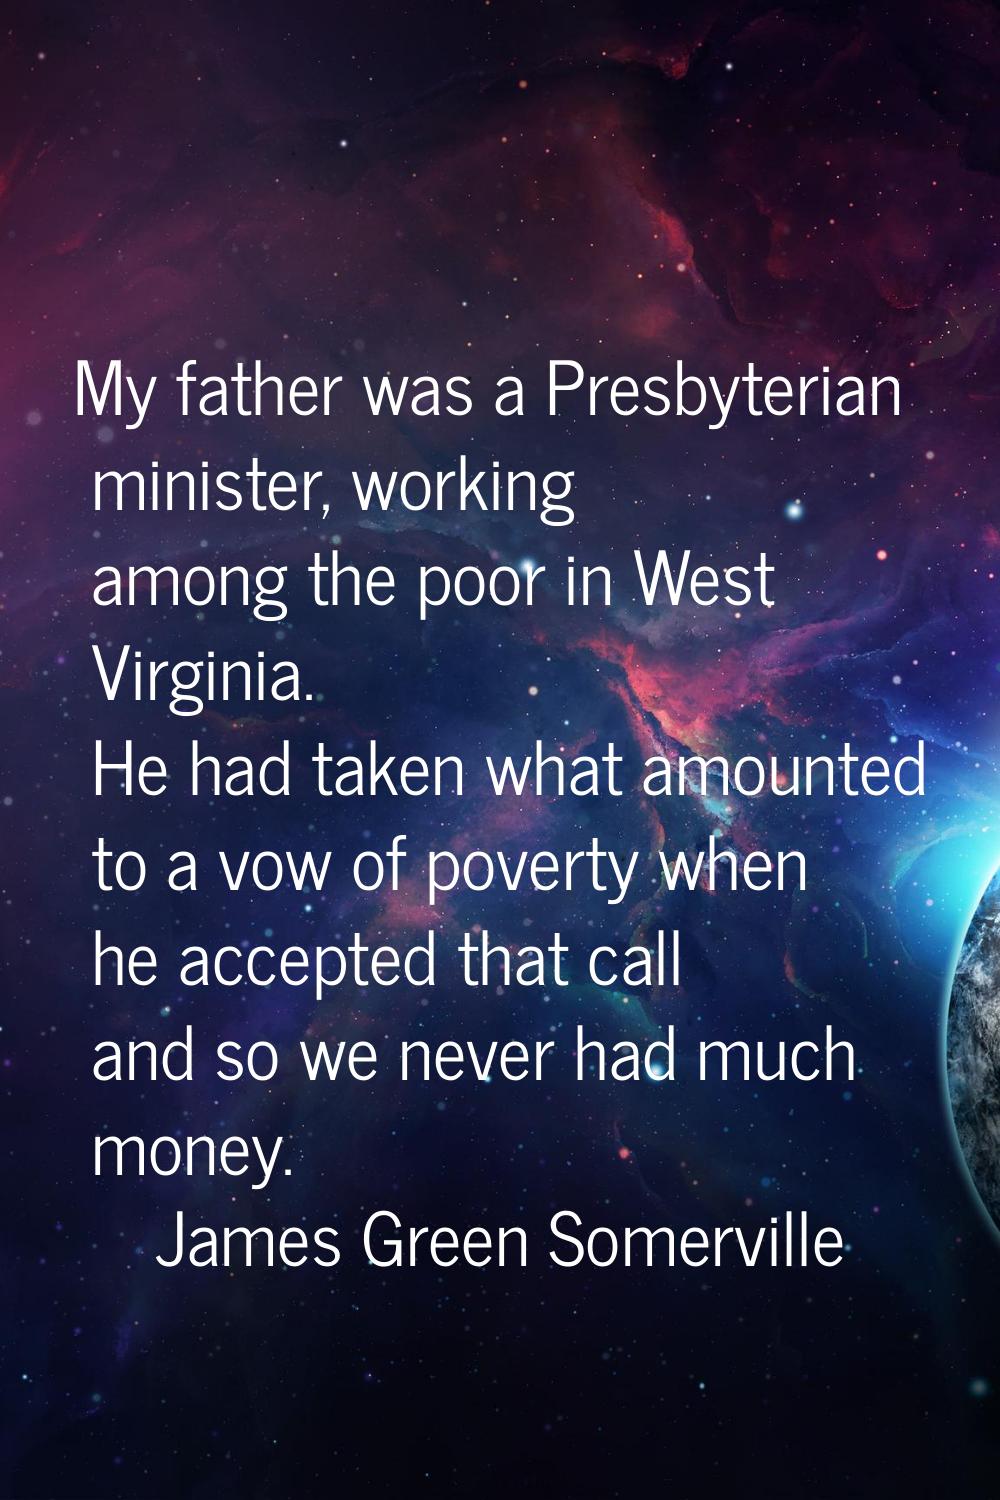 My father was a Presbyterian minister, working among the poor in West Virginia. He had taken what a